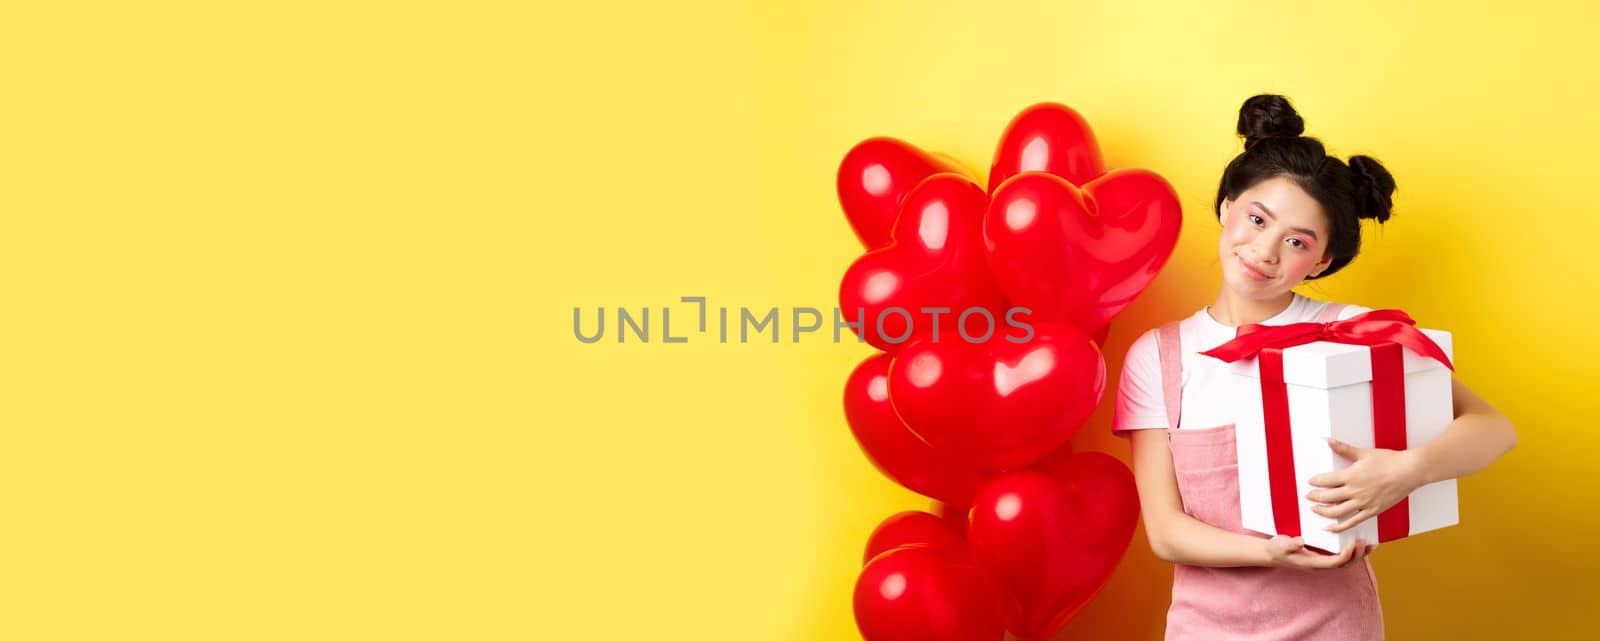 Happy Valentines day. Cute asian girl hugging surprise gift from boyfriend, standing near lovely red heart balloons and yellow background.